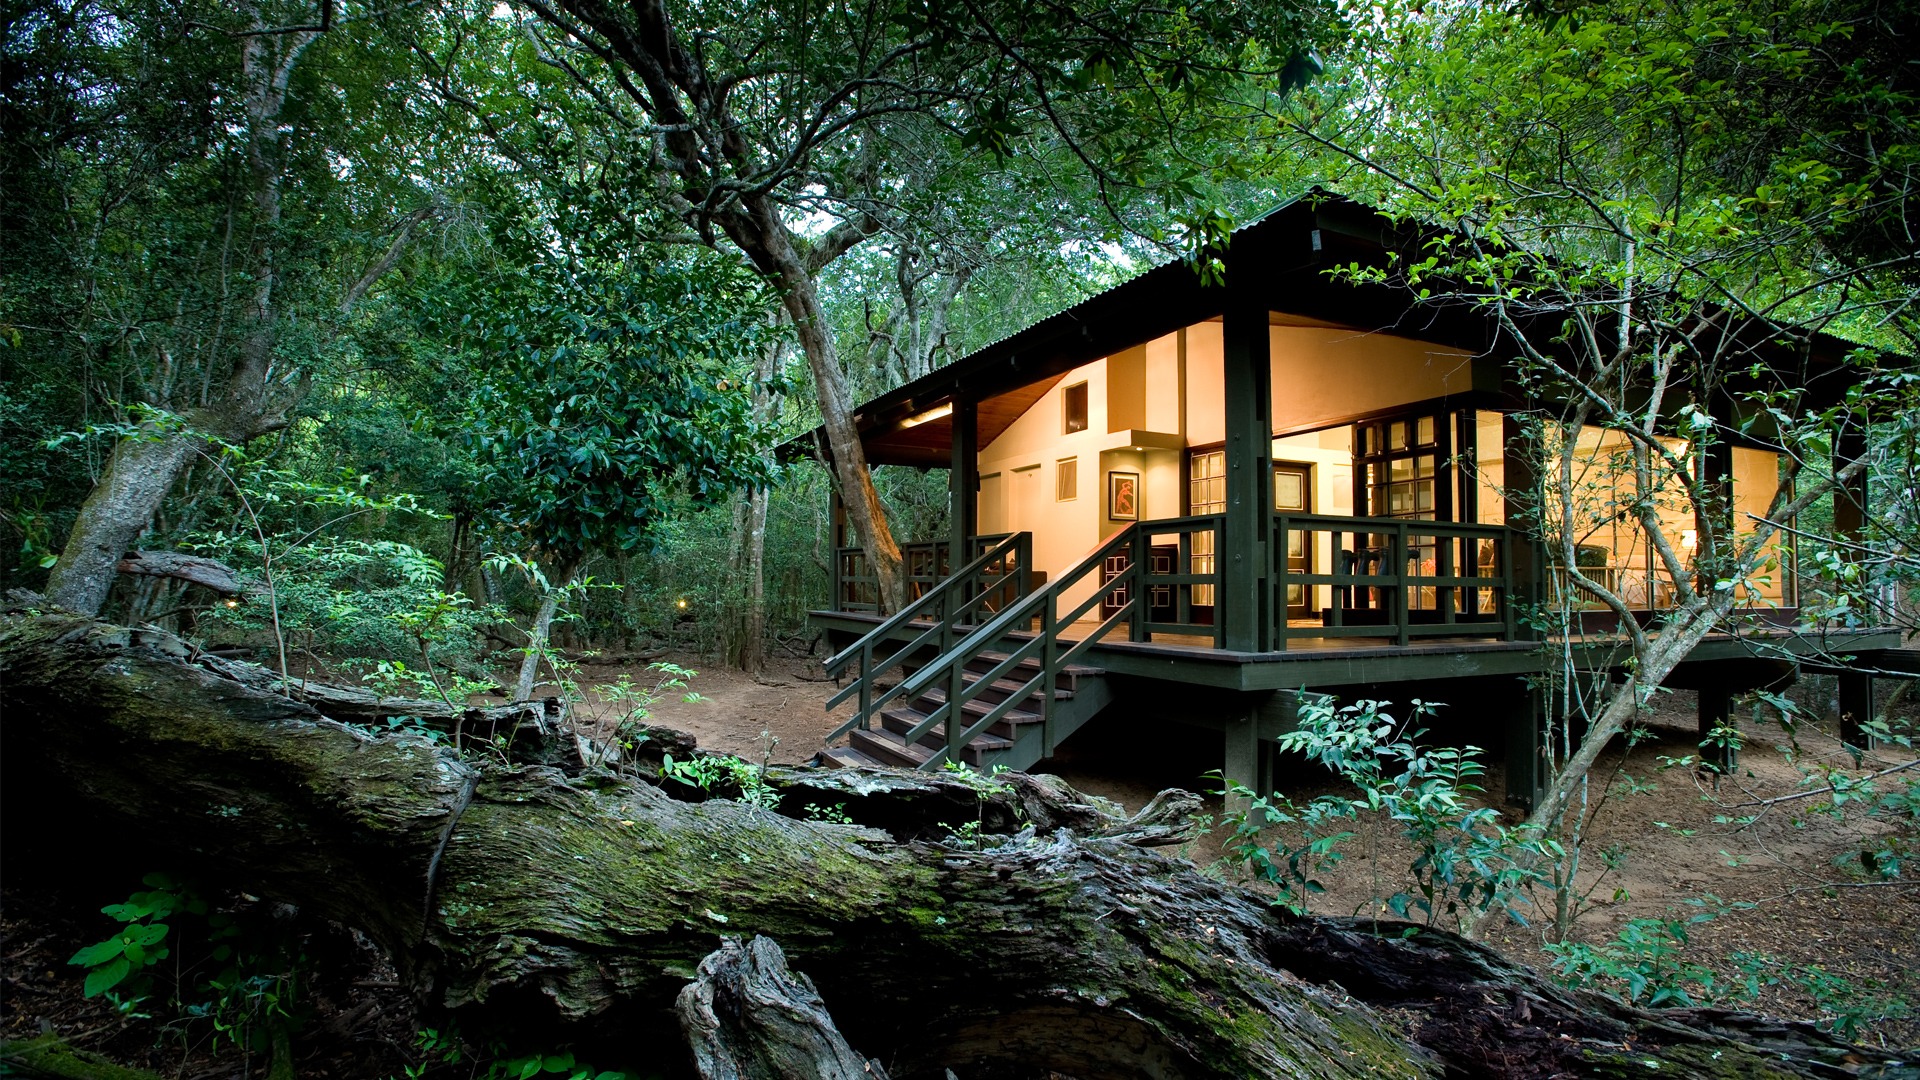 Discover the newly renovated Phinda Forest Lodge by andBeyond in the heart of Africa’s Sand Forest